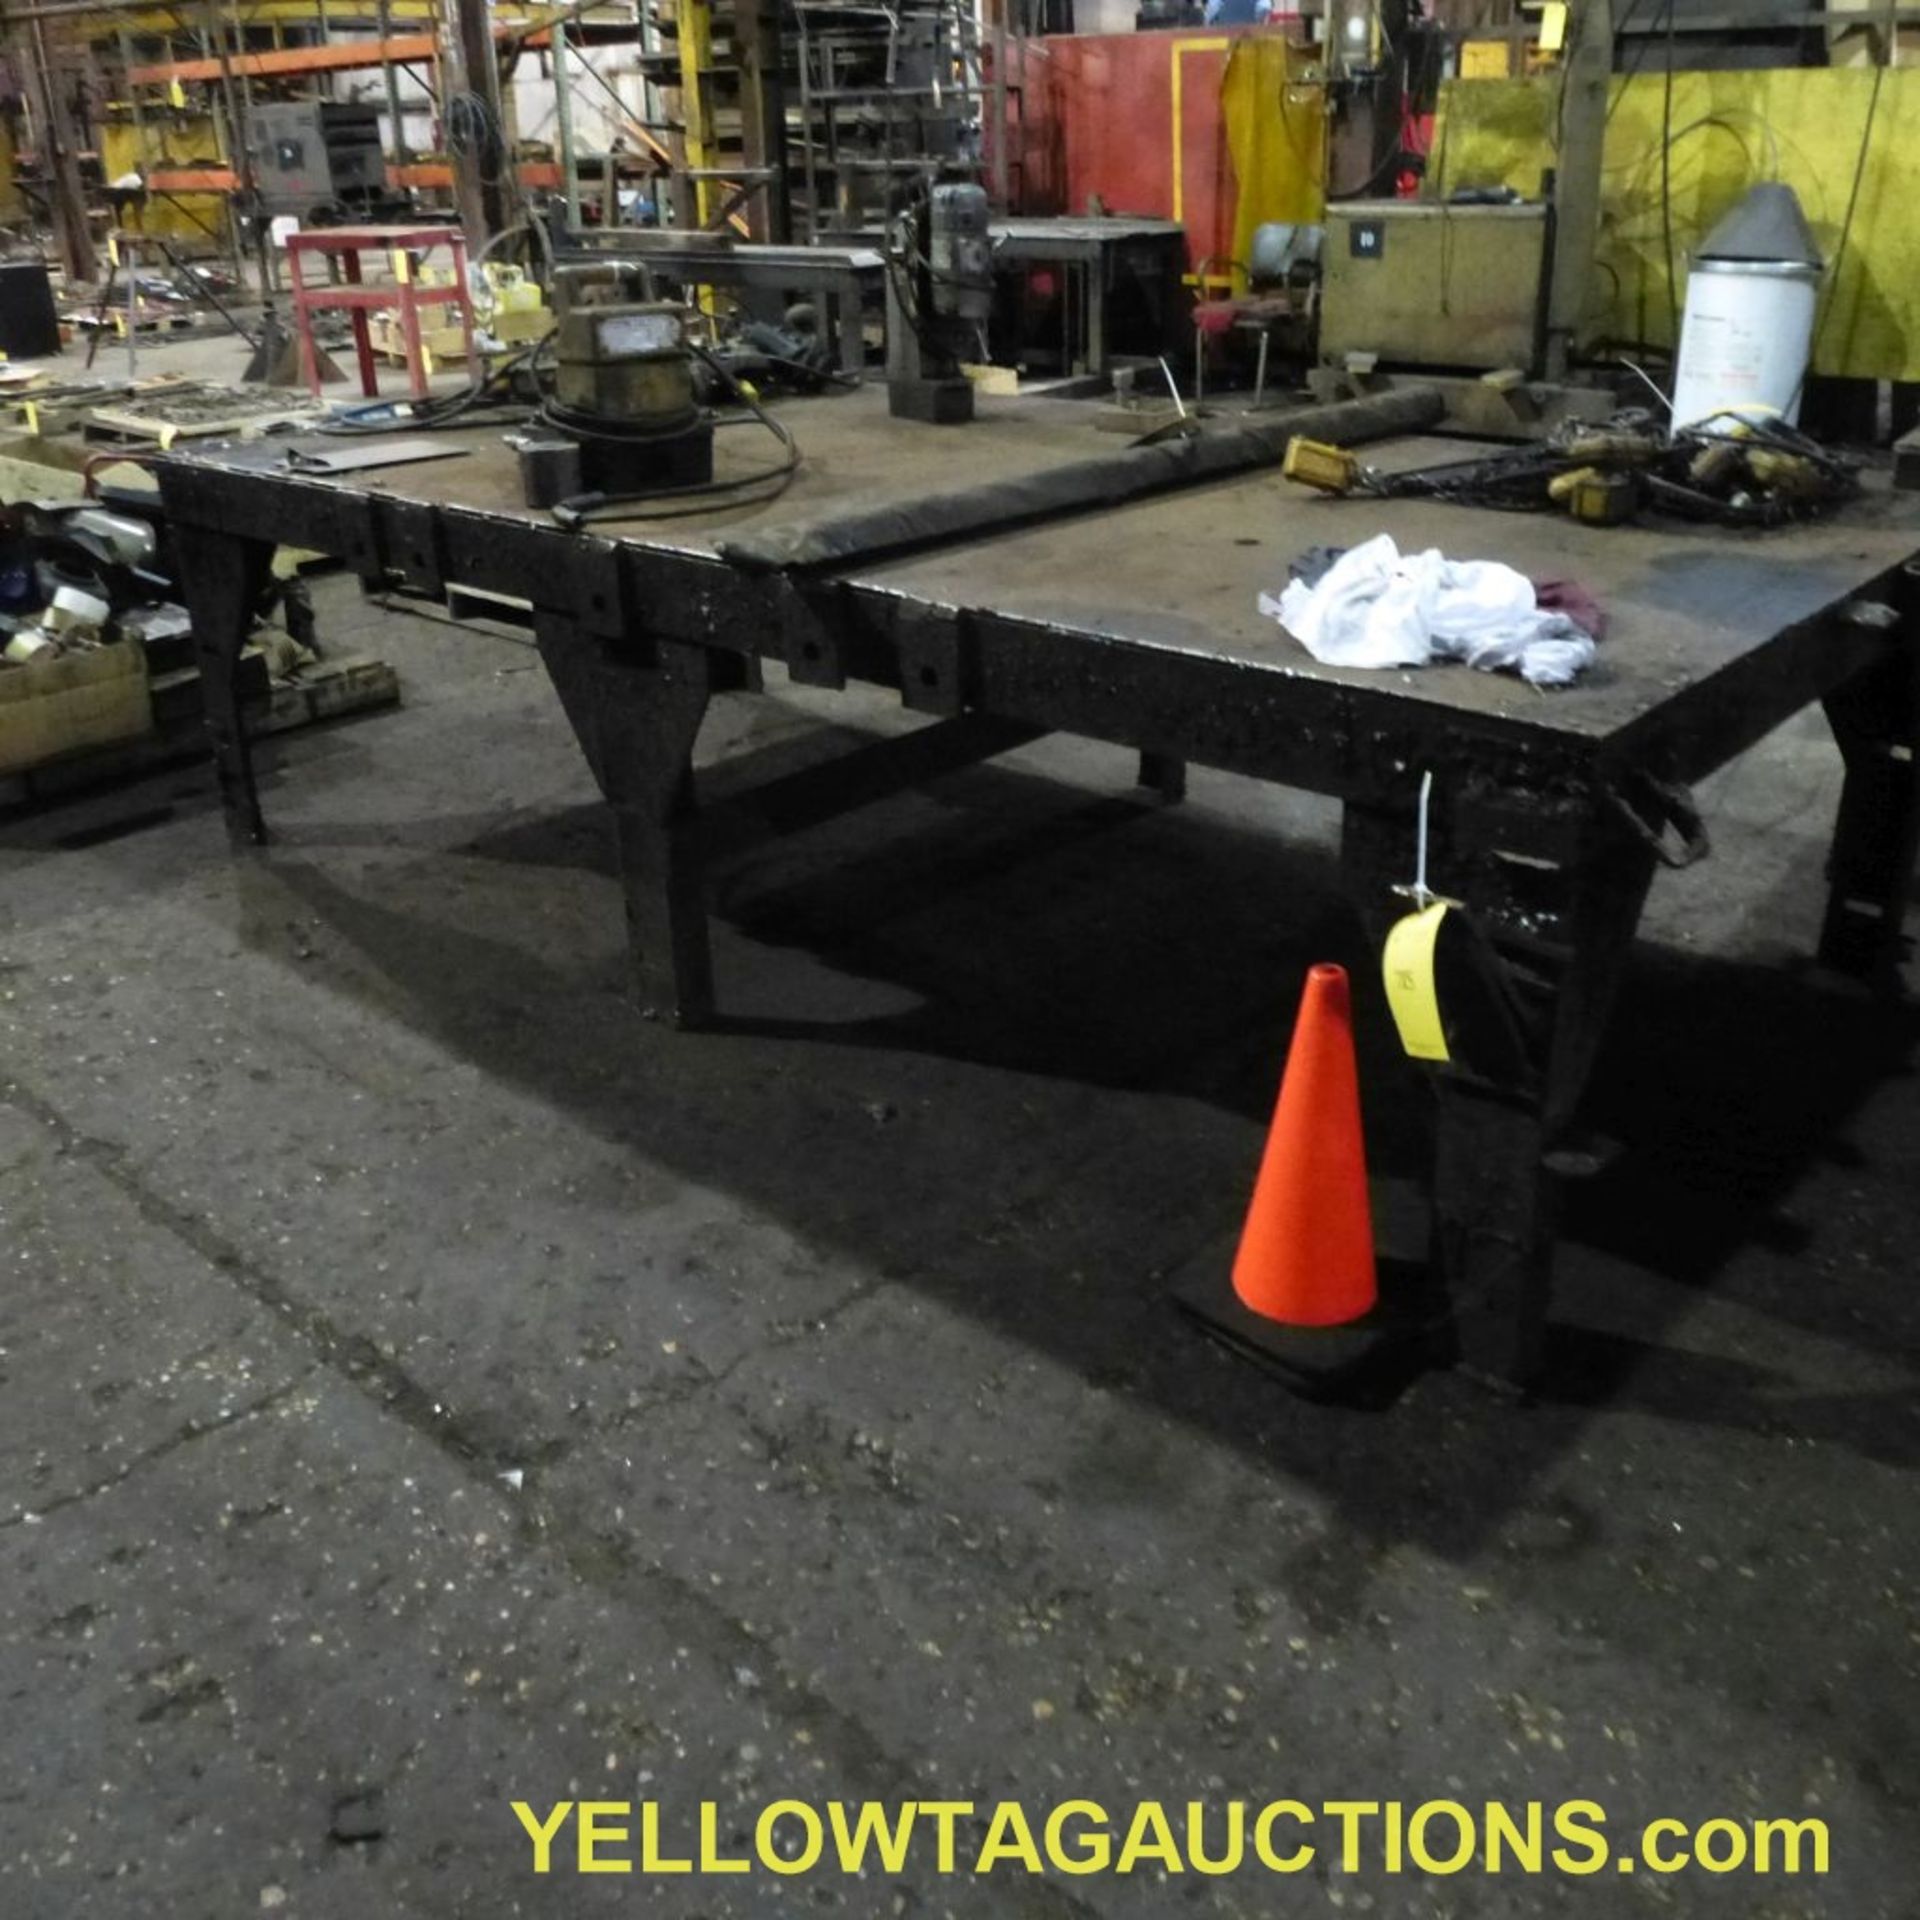 Steel Work Bench/Welding Table|58" x 120" x 33"|Tag: 785 - Image 2 of 4